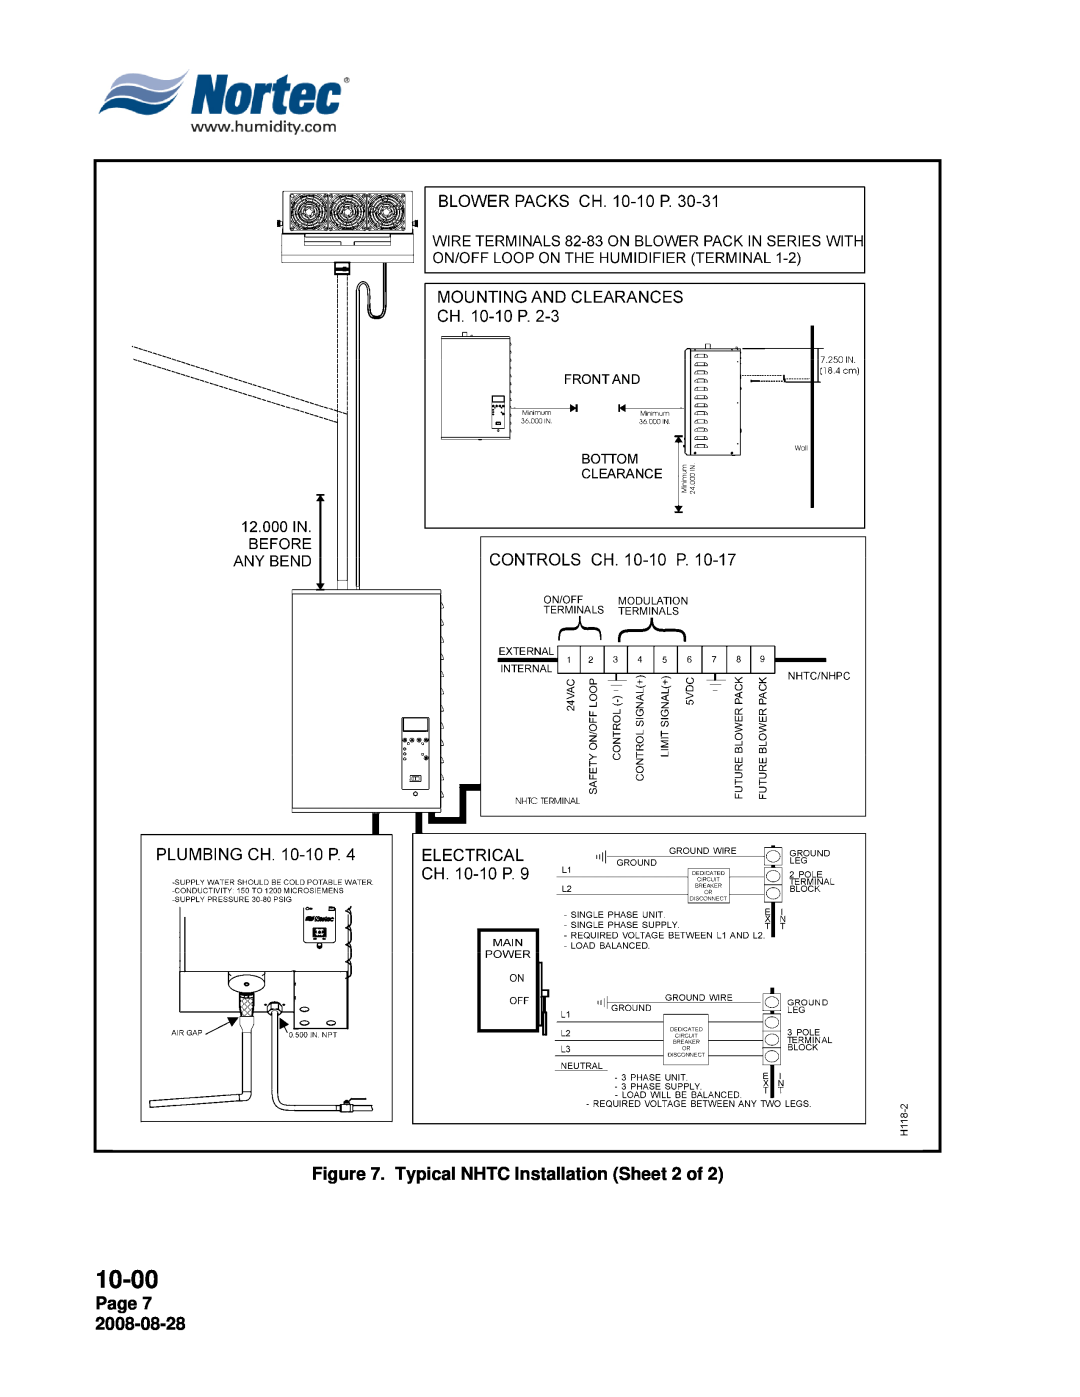 Nortec NH Series installation manual 10-00, Typical NHTC Installation Sheet 2 of, Page 7 